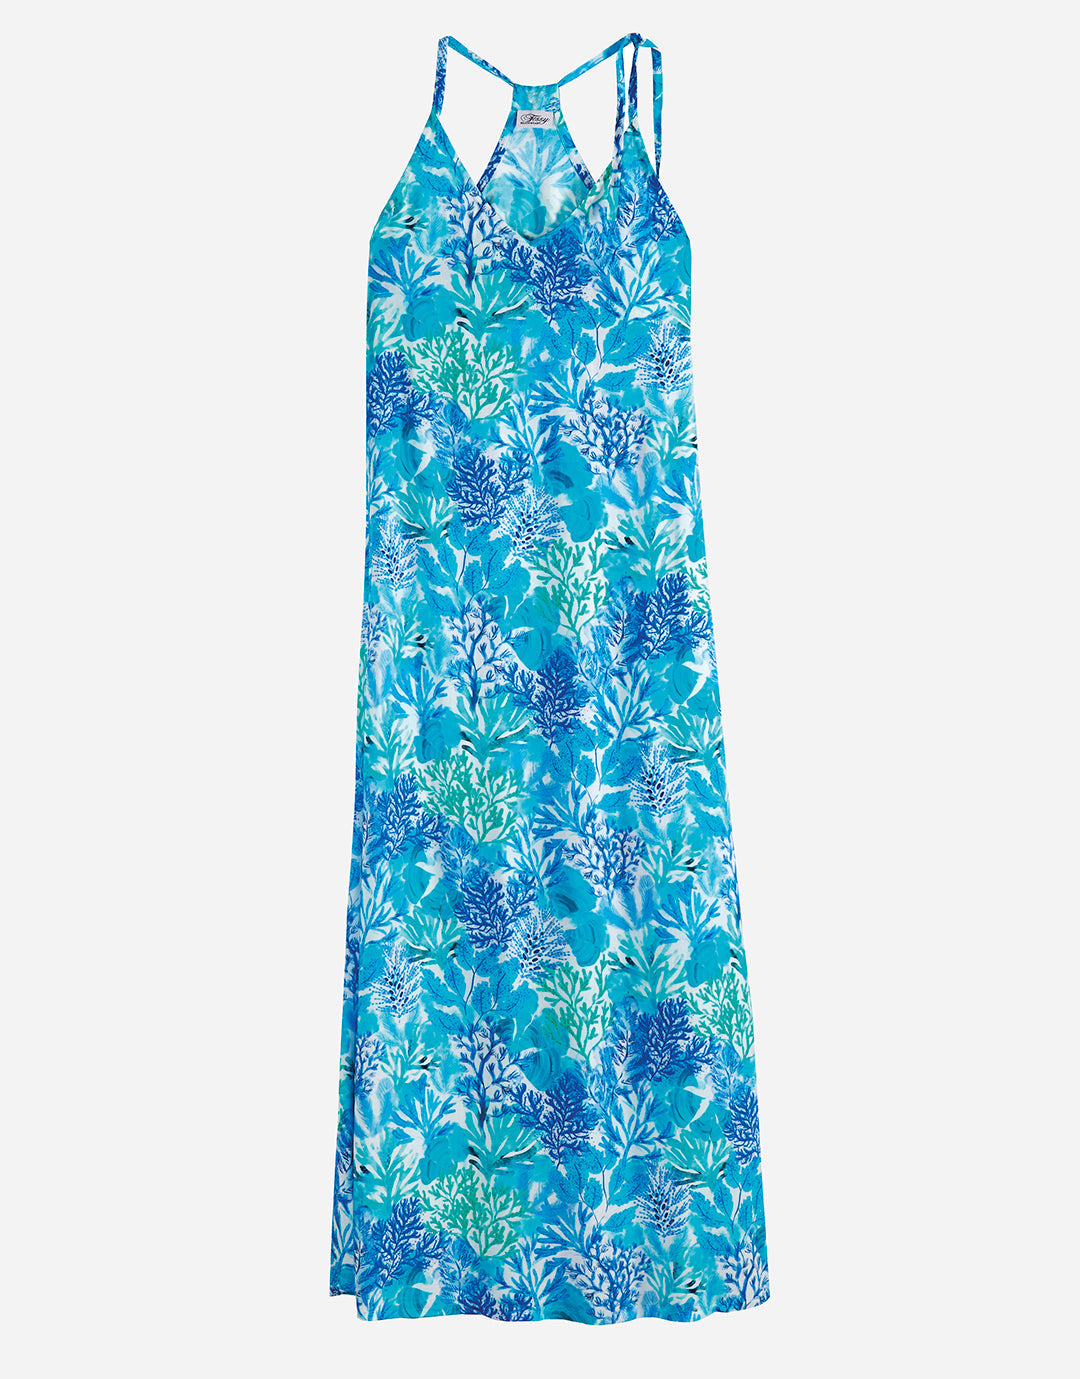 Coral Maxi Dress - Turquoise - Simply Beach UK